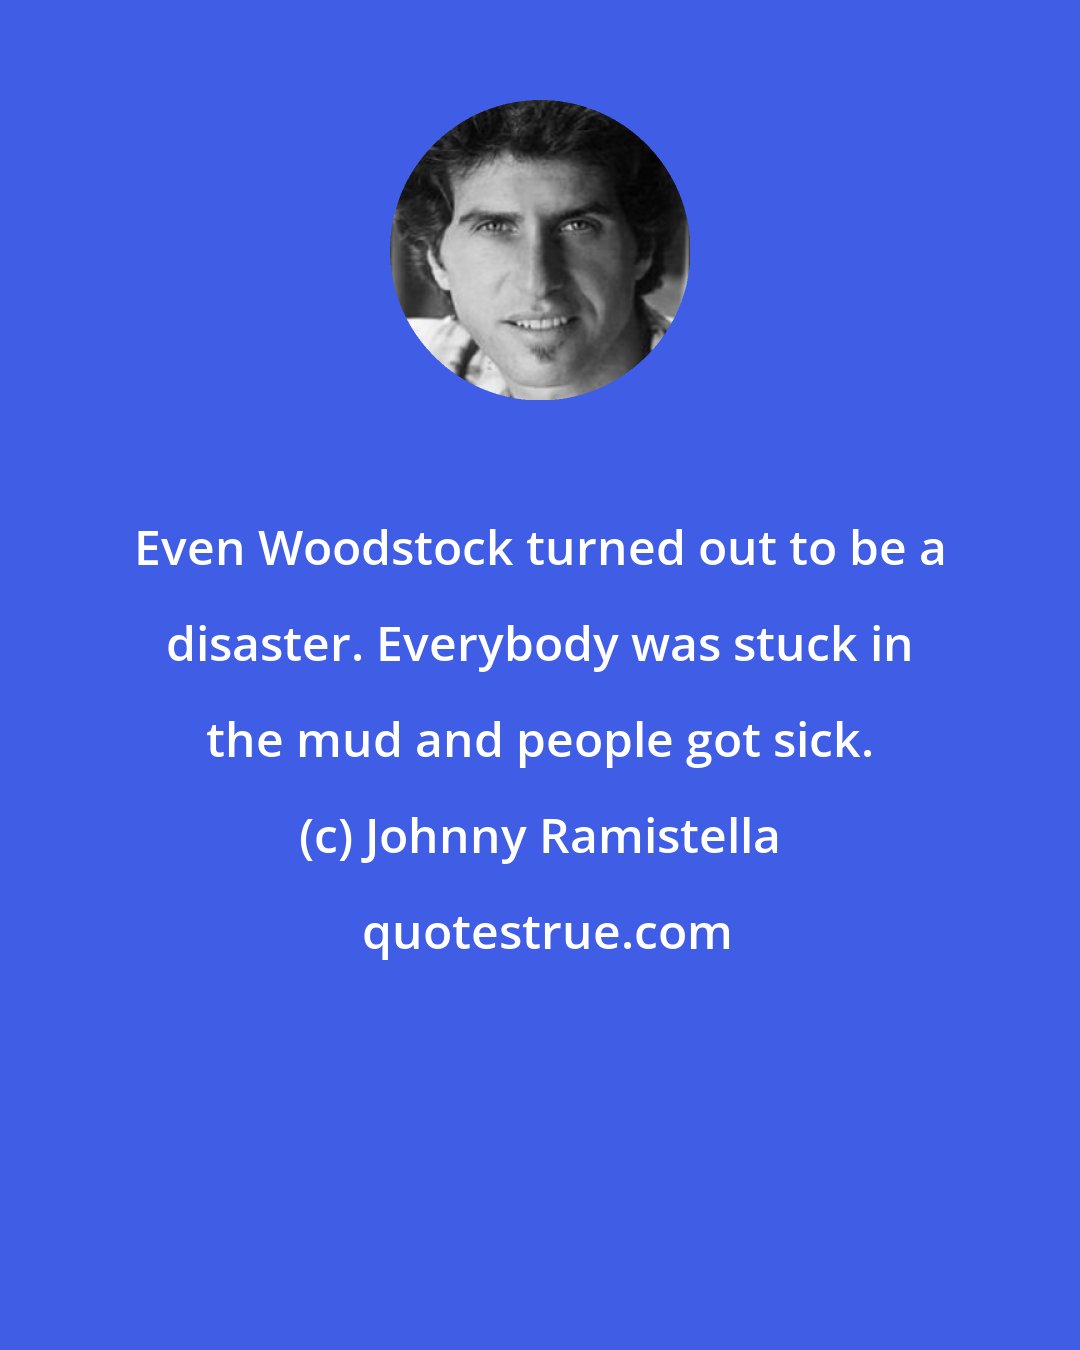 Johnny Ramistella: Even Woodstock turned out to be a disaster. Everybody was stuck in the mud and people got sick.